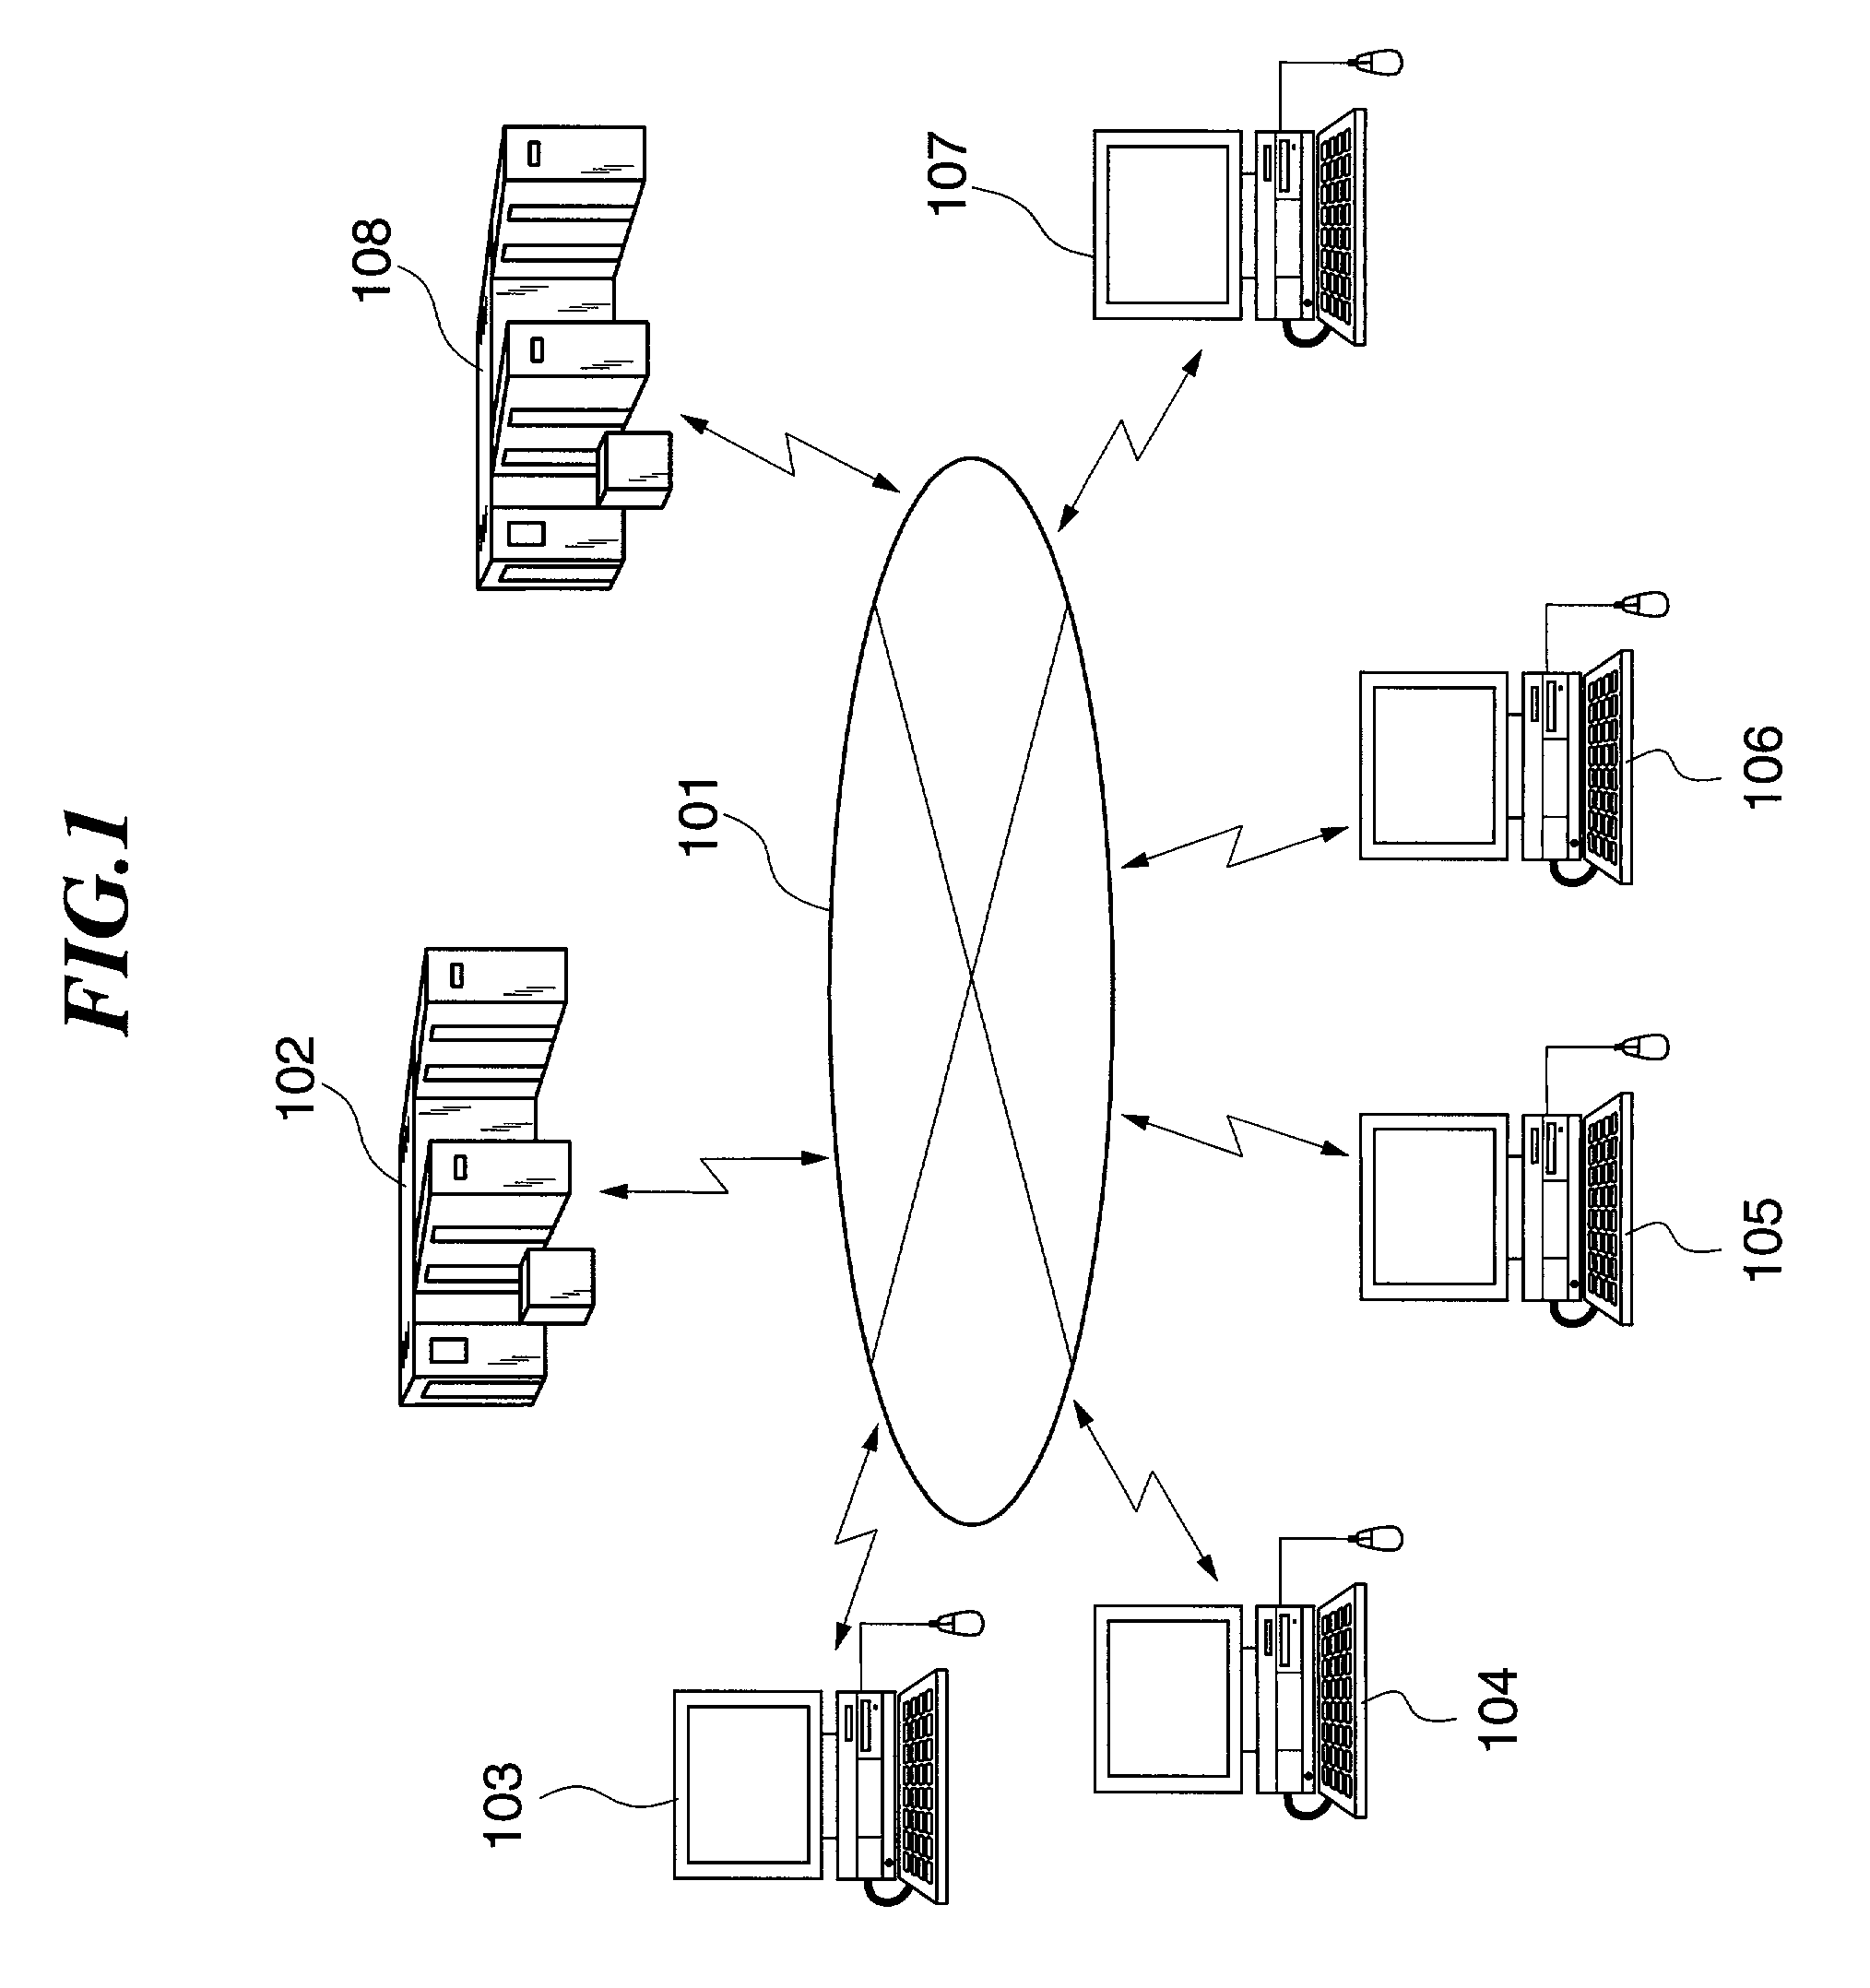 License-issuing system and method